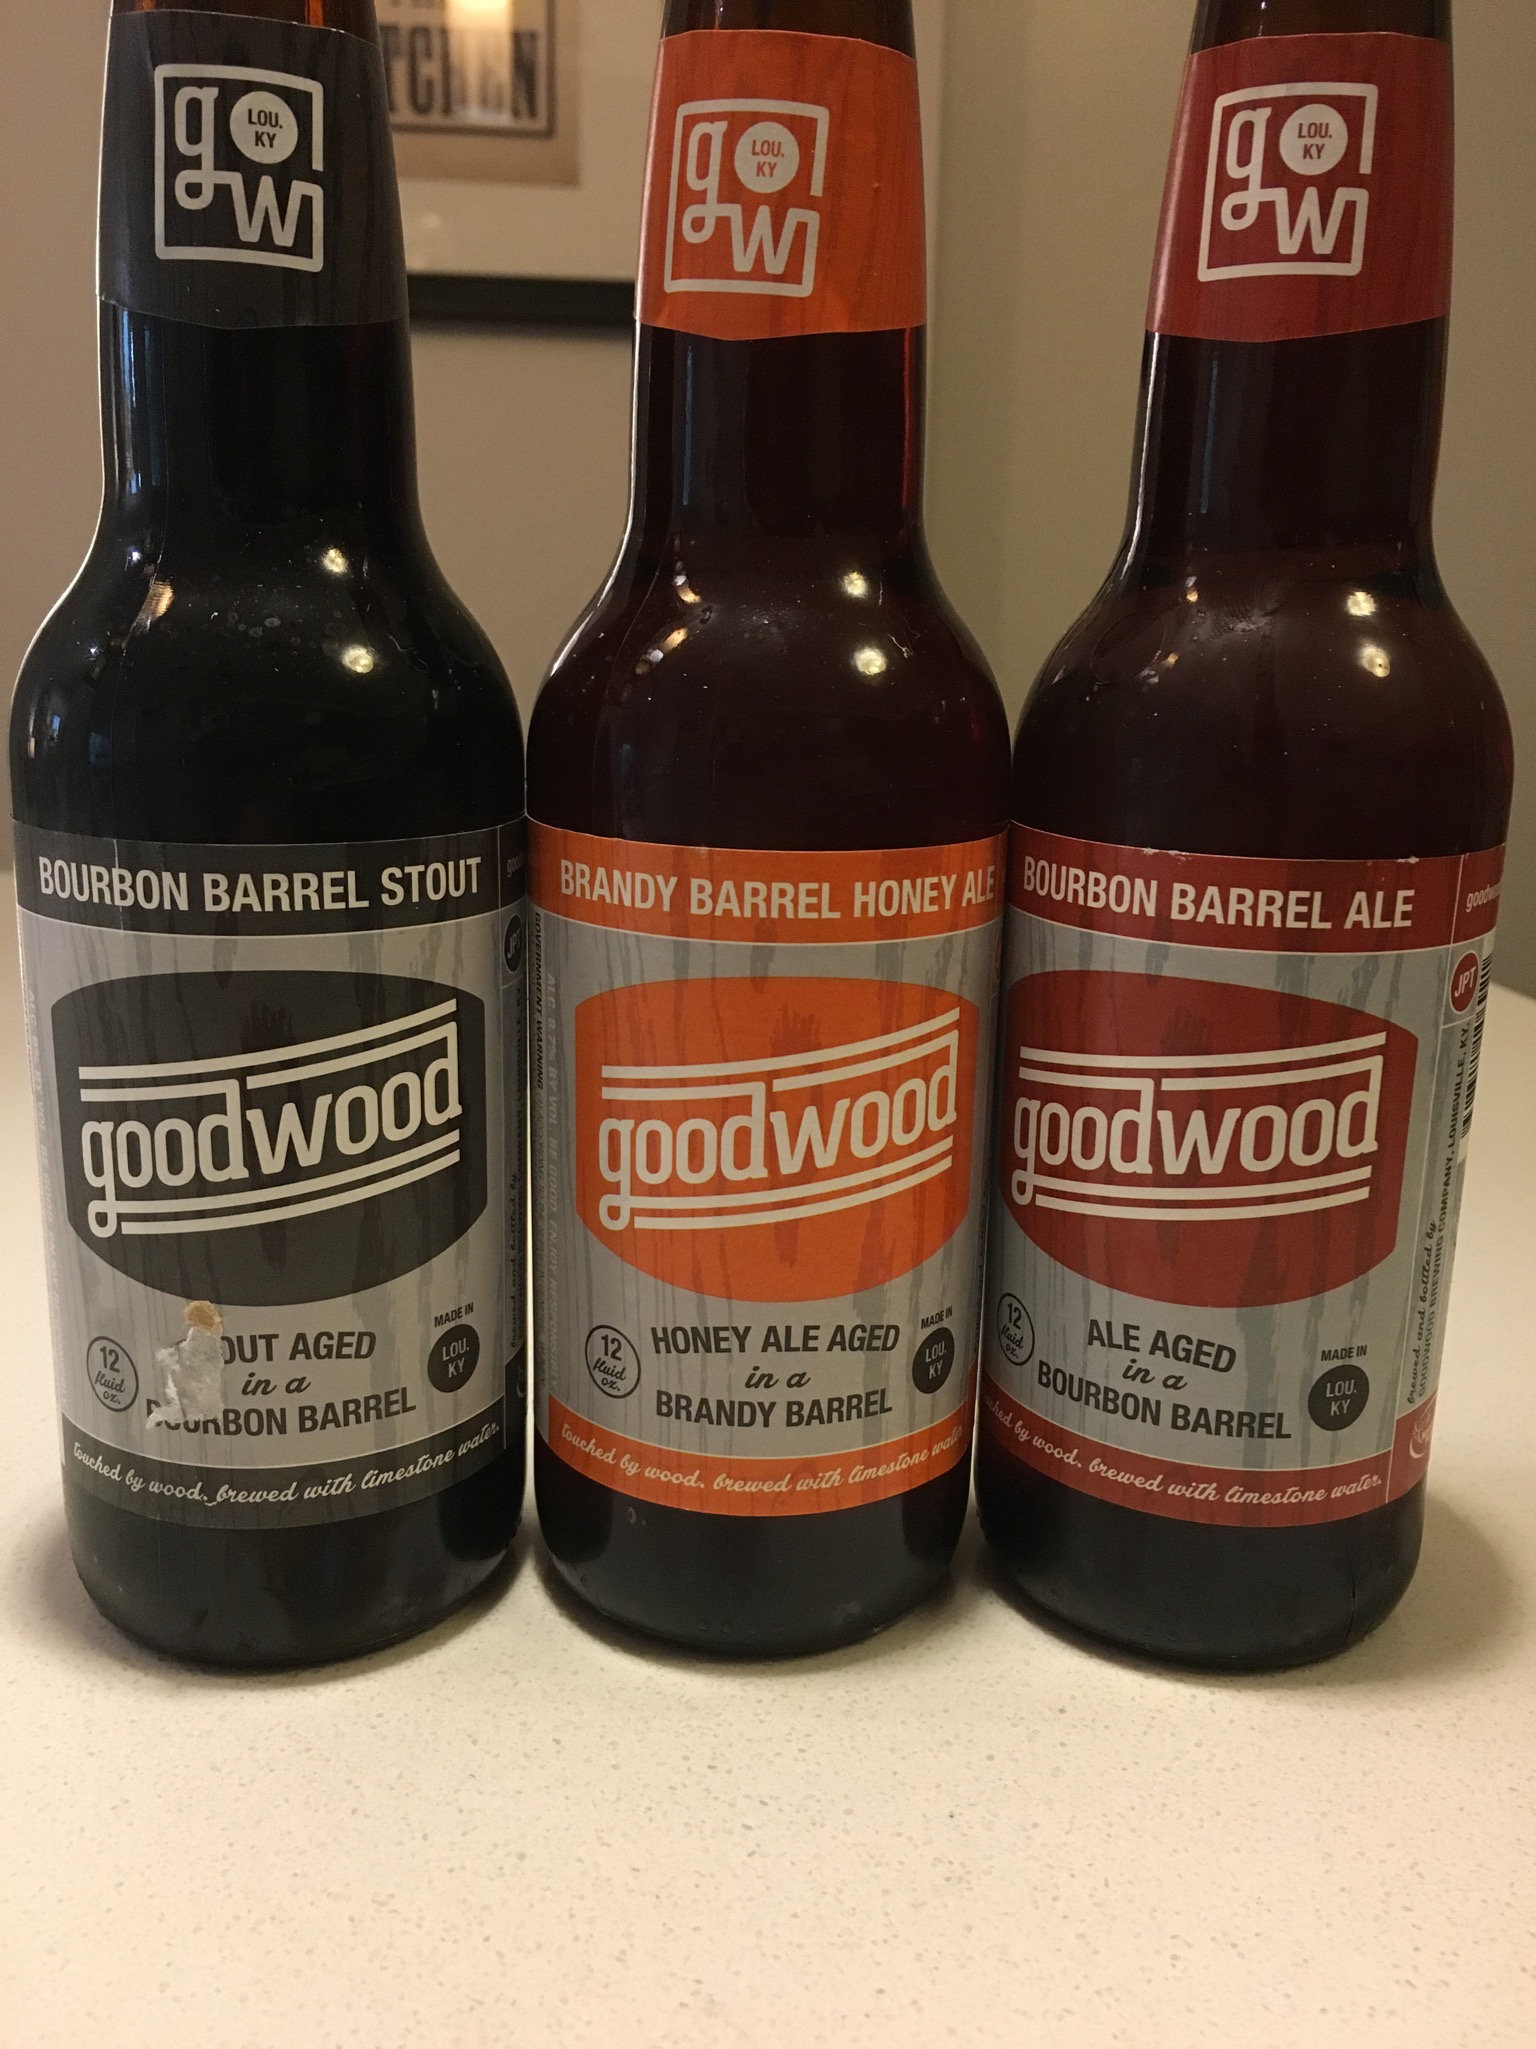 Goodwood Brewing Company expands to Chicagoland area